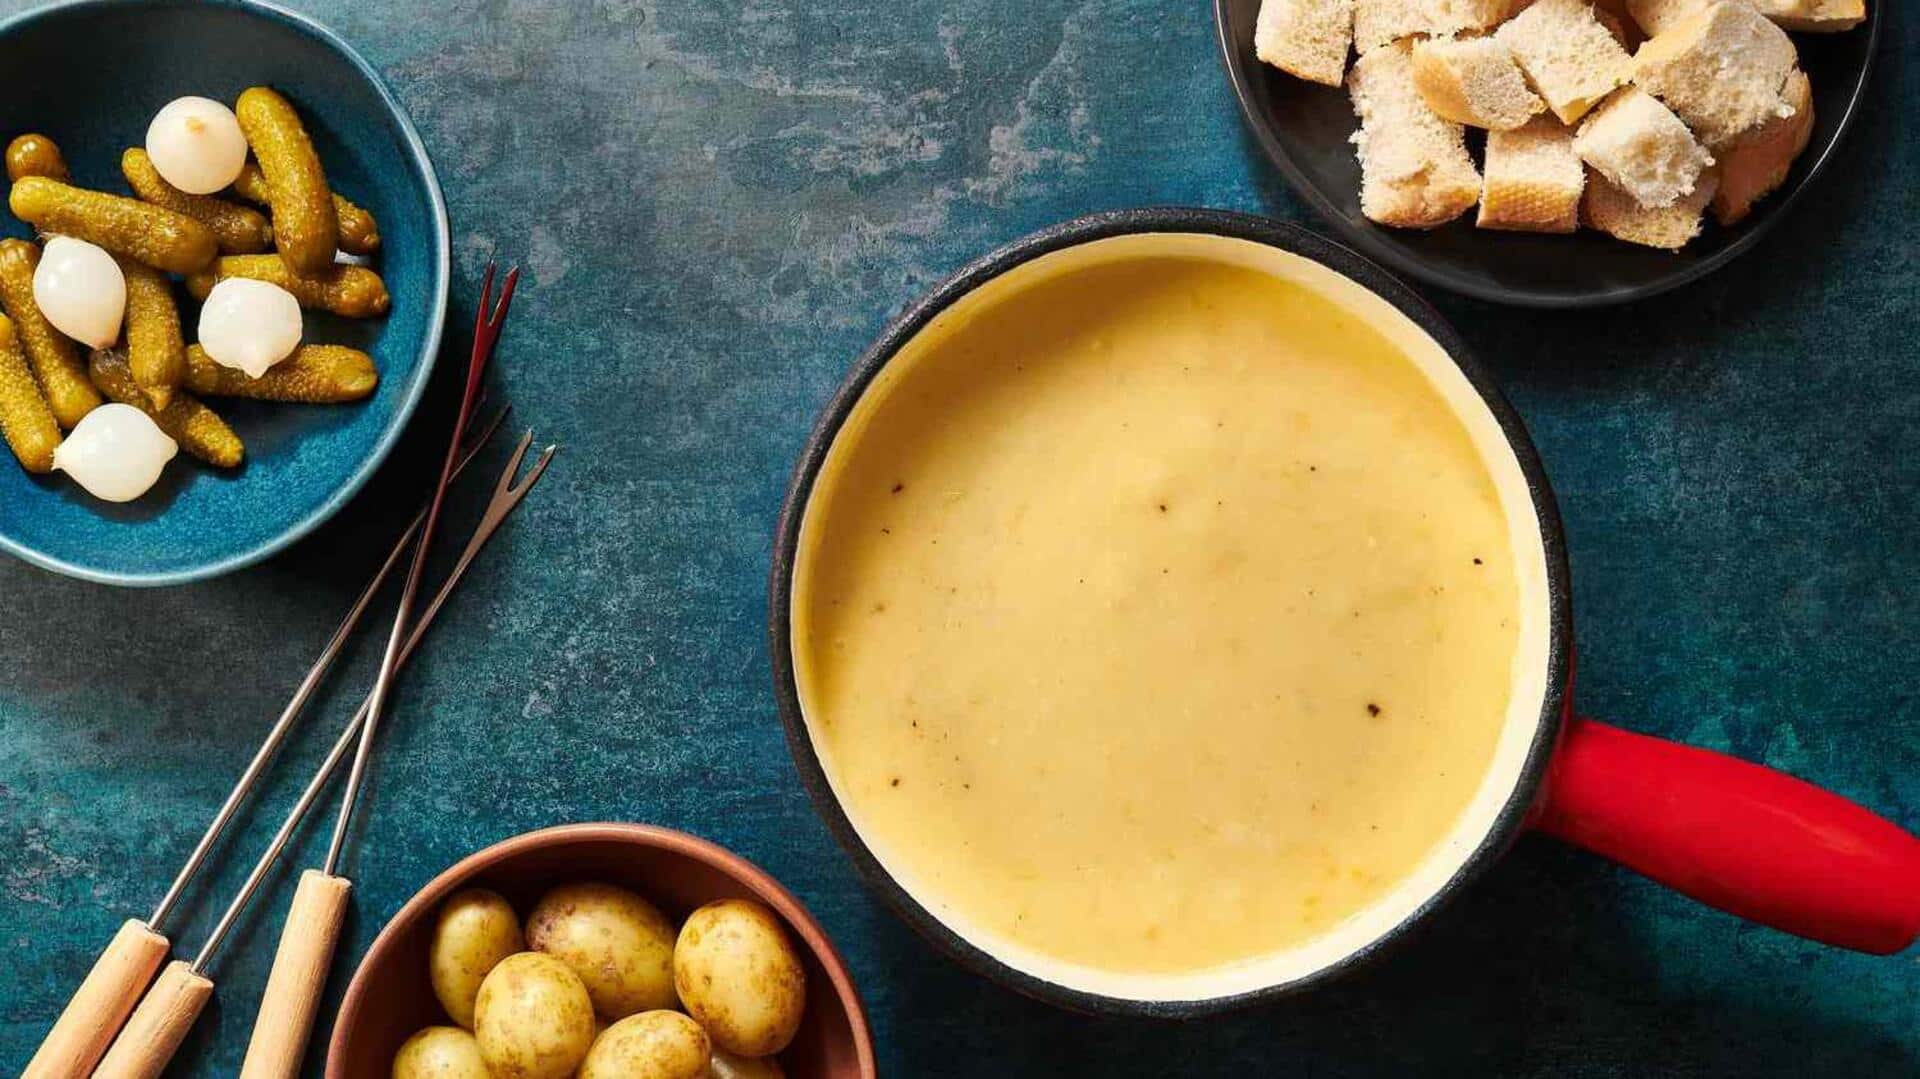 Recipe: Cook this lip-smacking Swiss cheese fondue at home